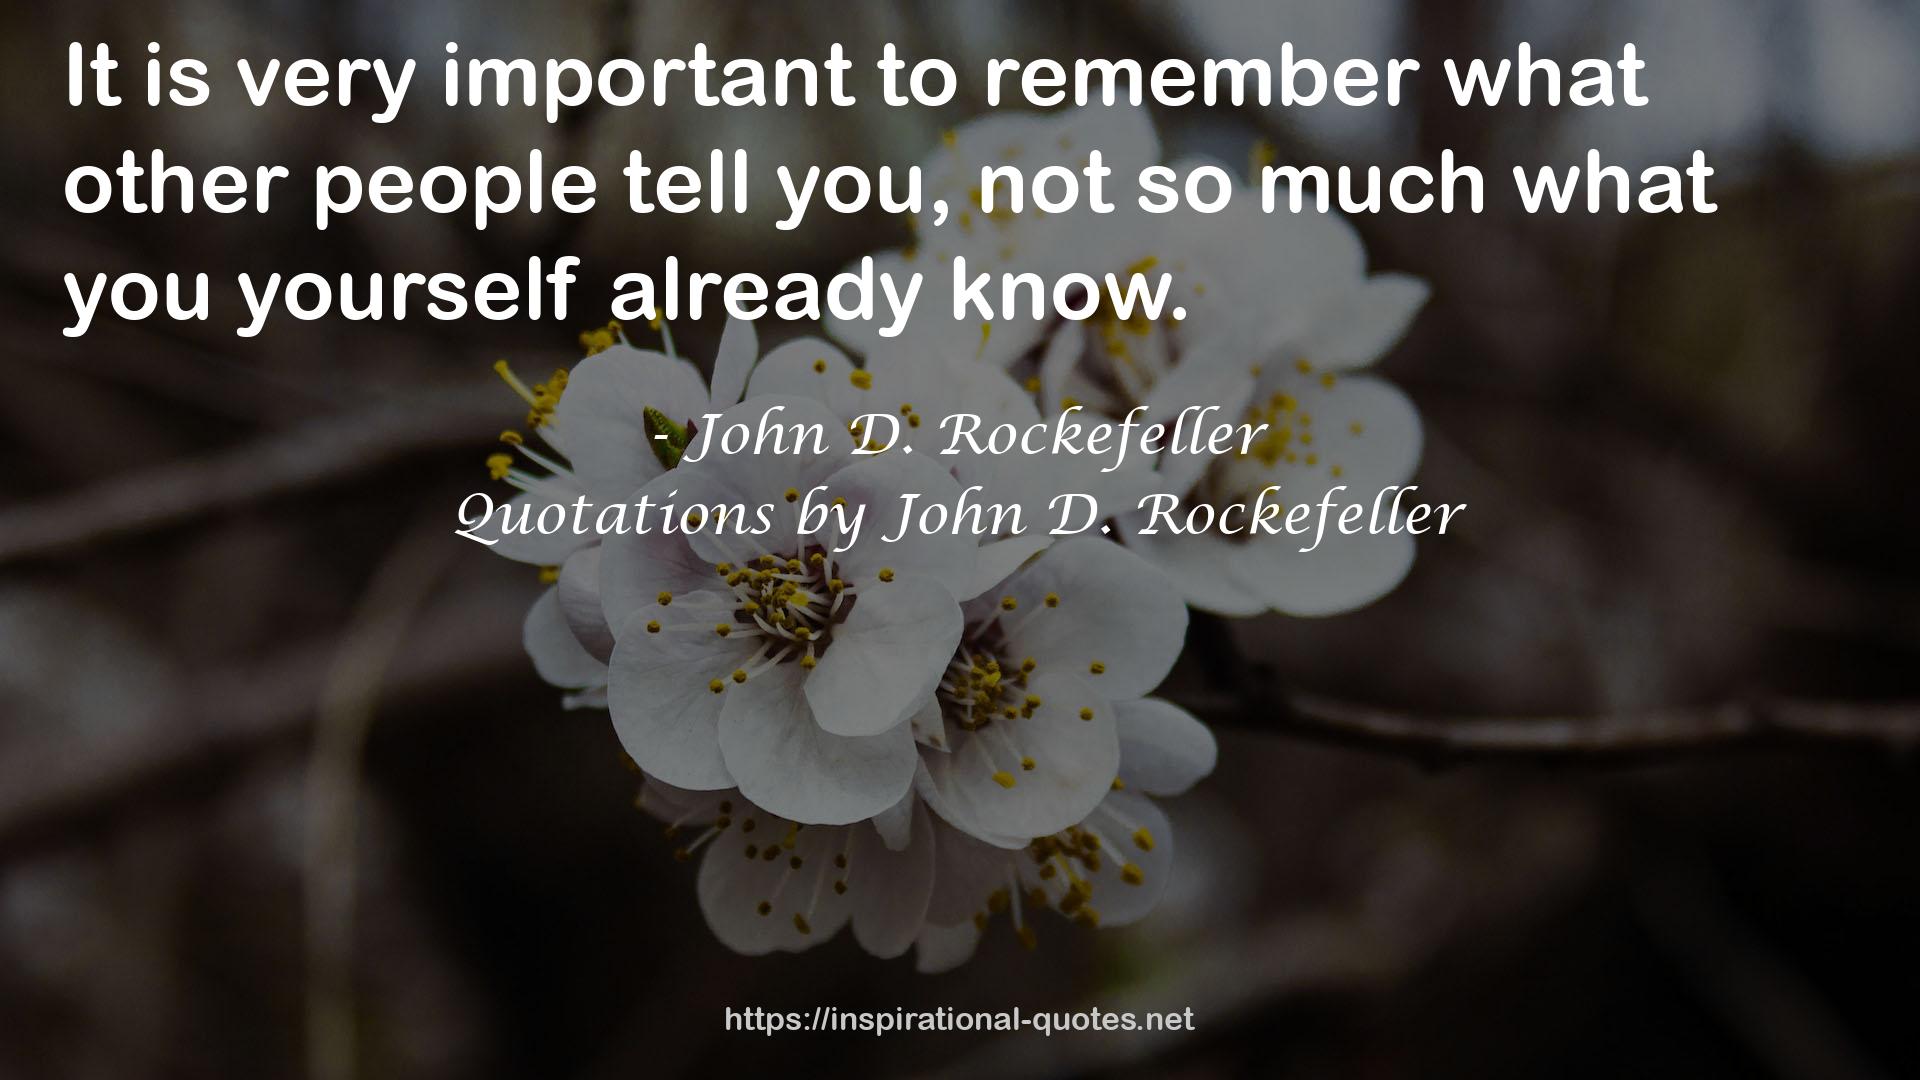 Quotations by John D. Rockefeller QUOTES